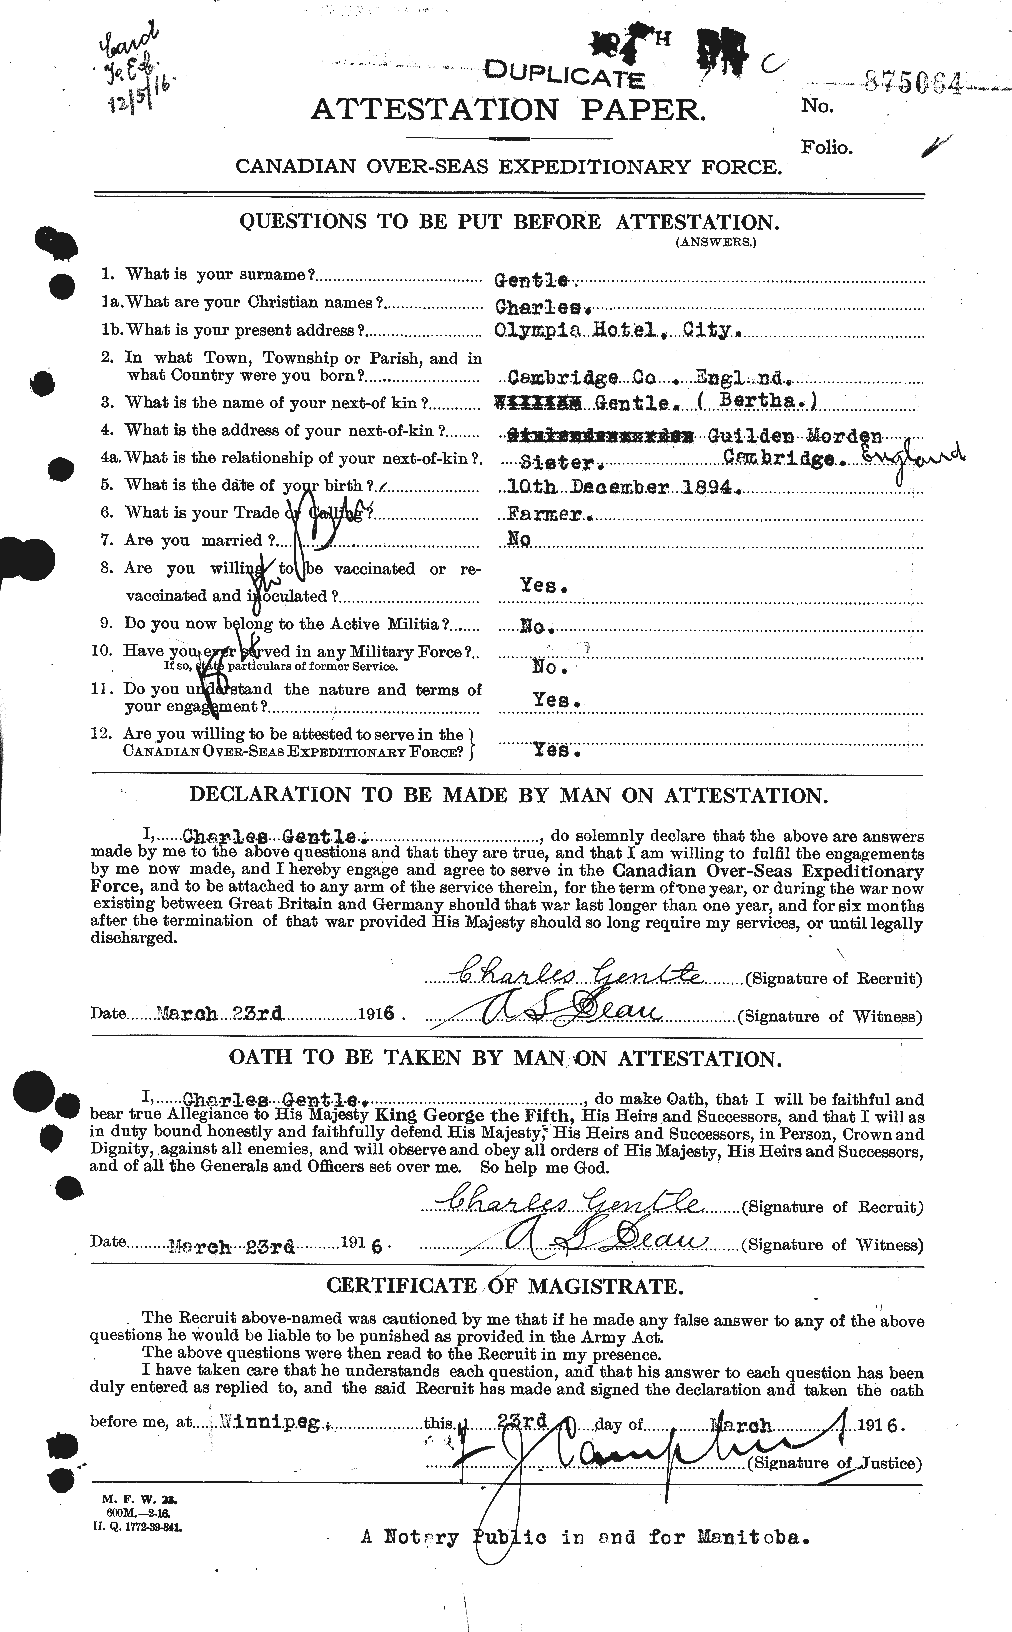 Personnel Records of the First World War - CEF 341517a